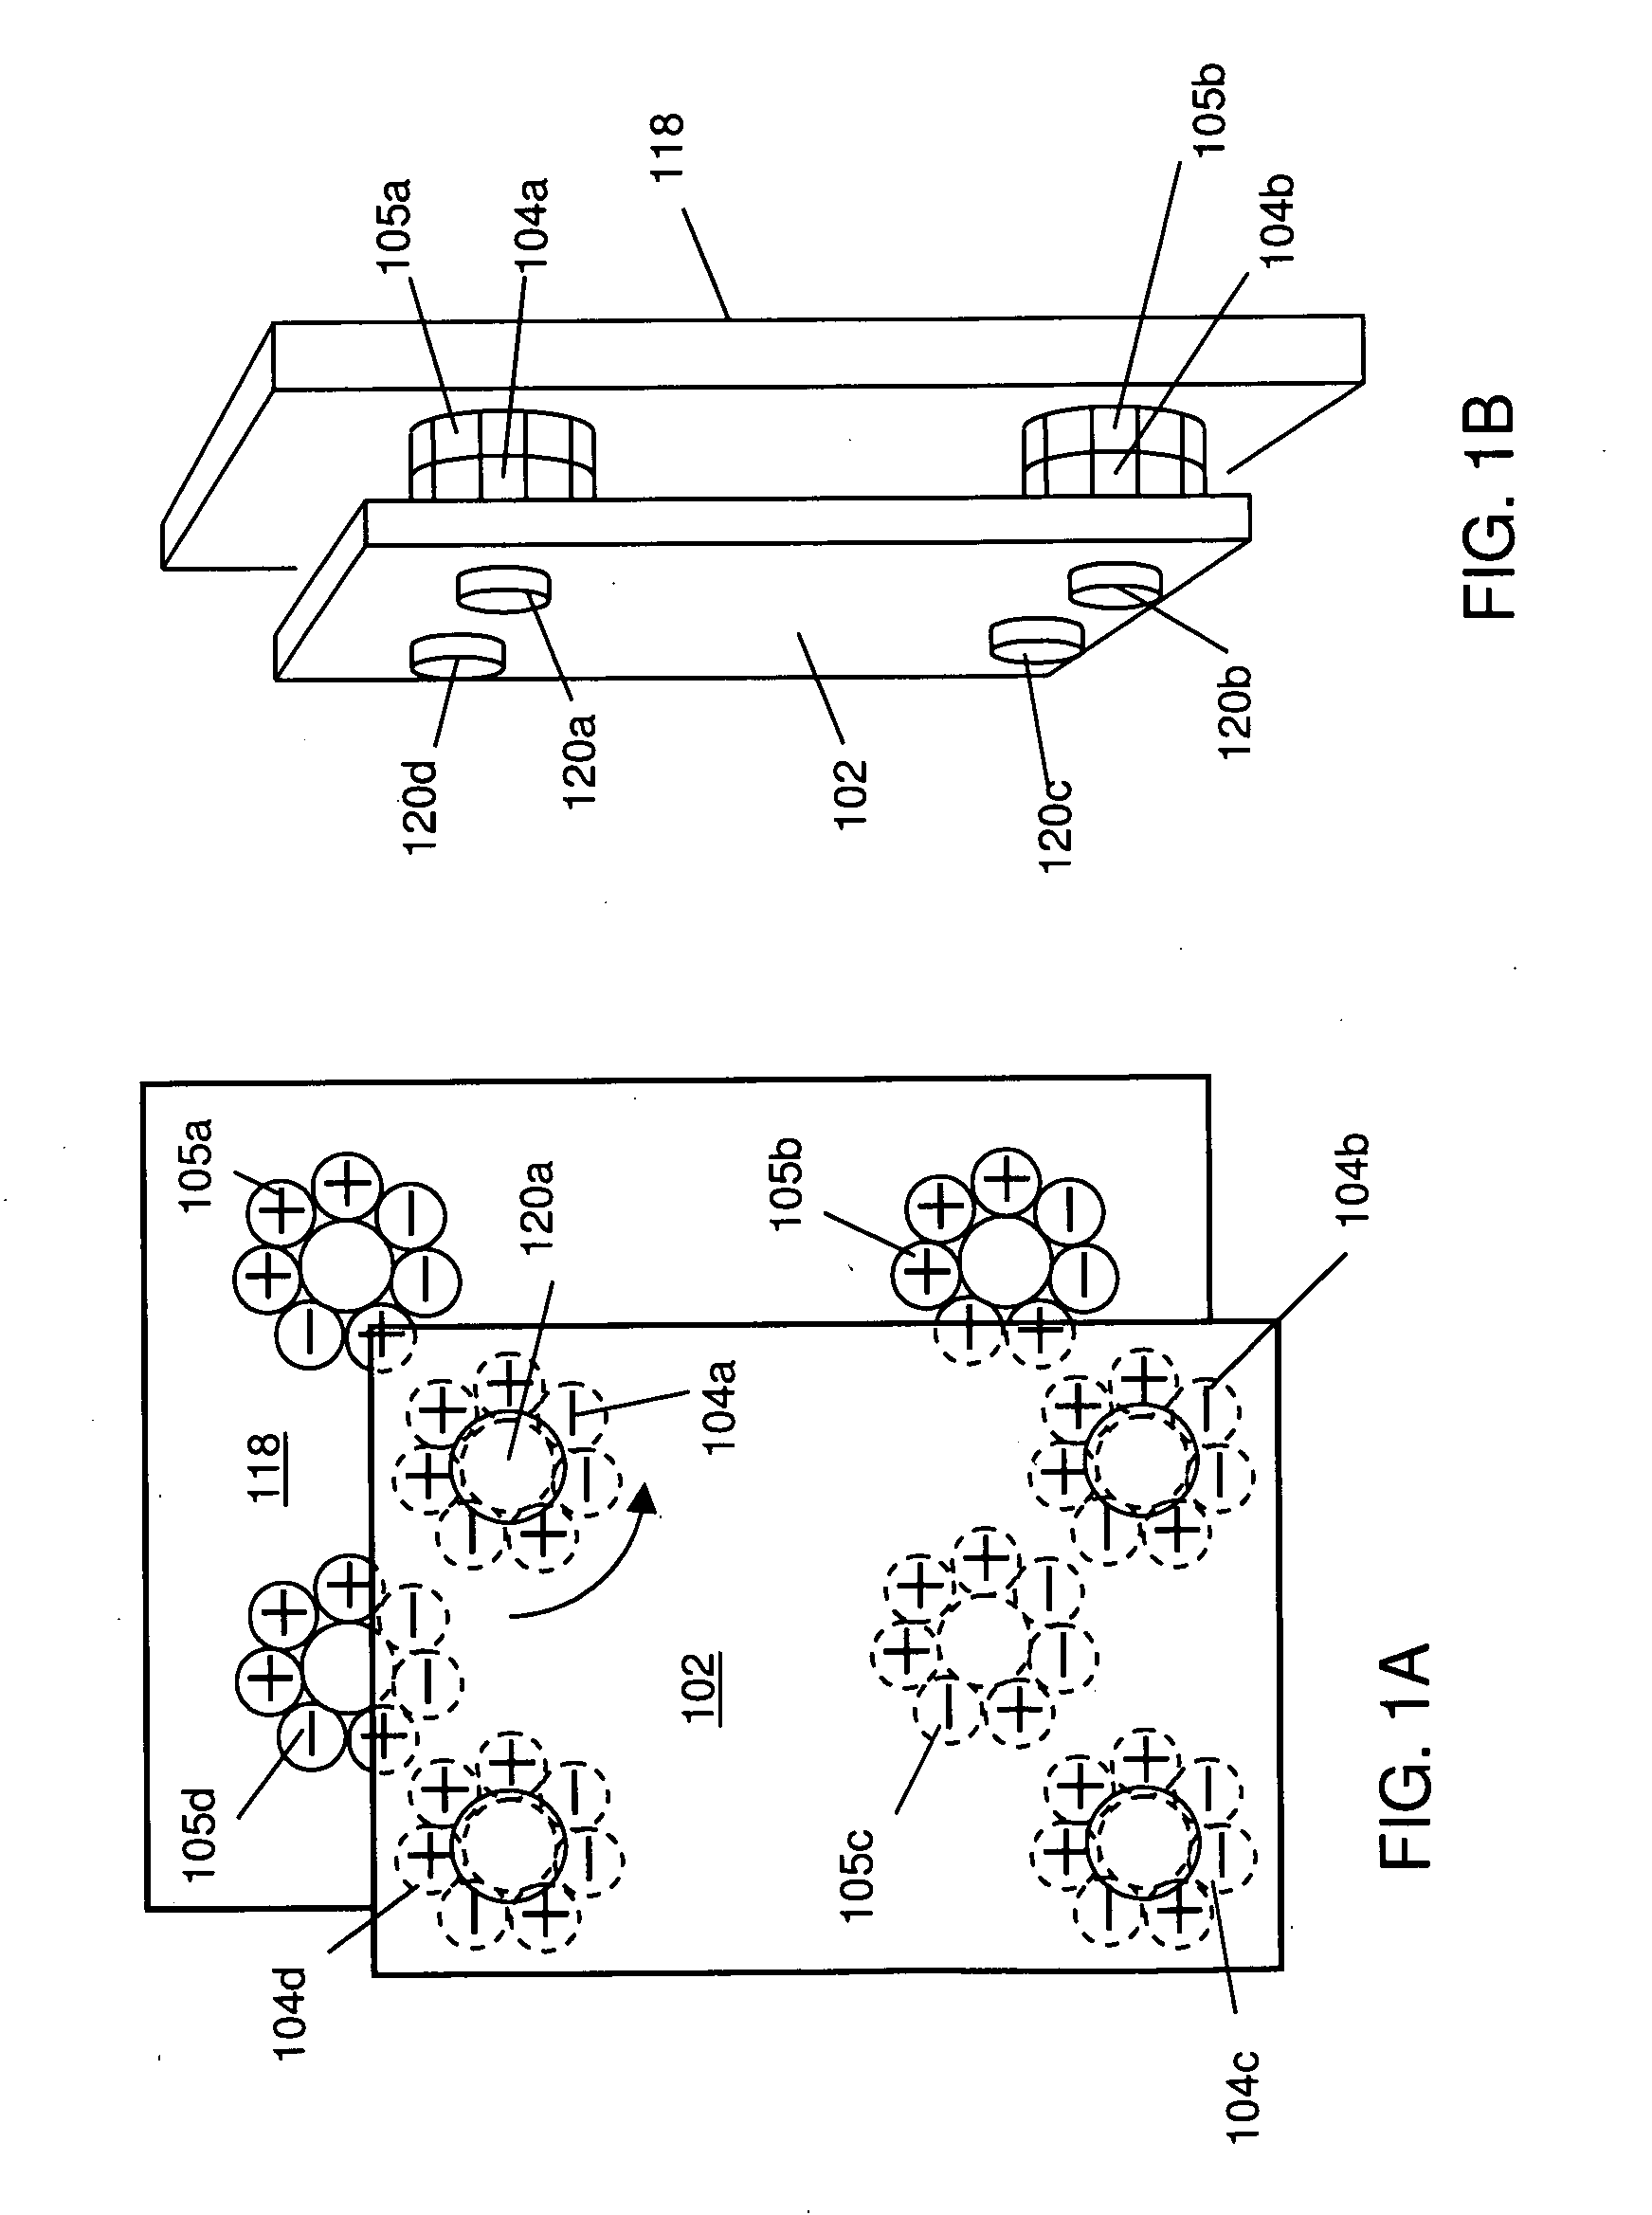 Coded Magnet Structures for Selective Association of Articles